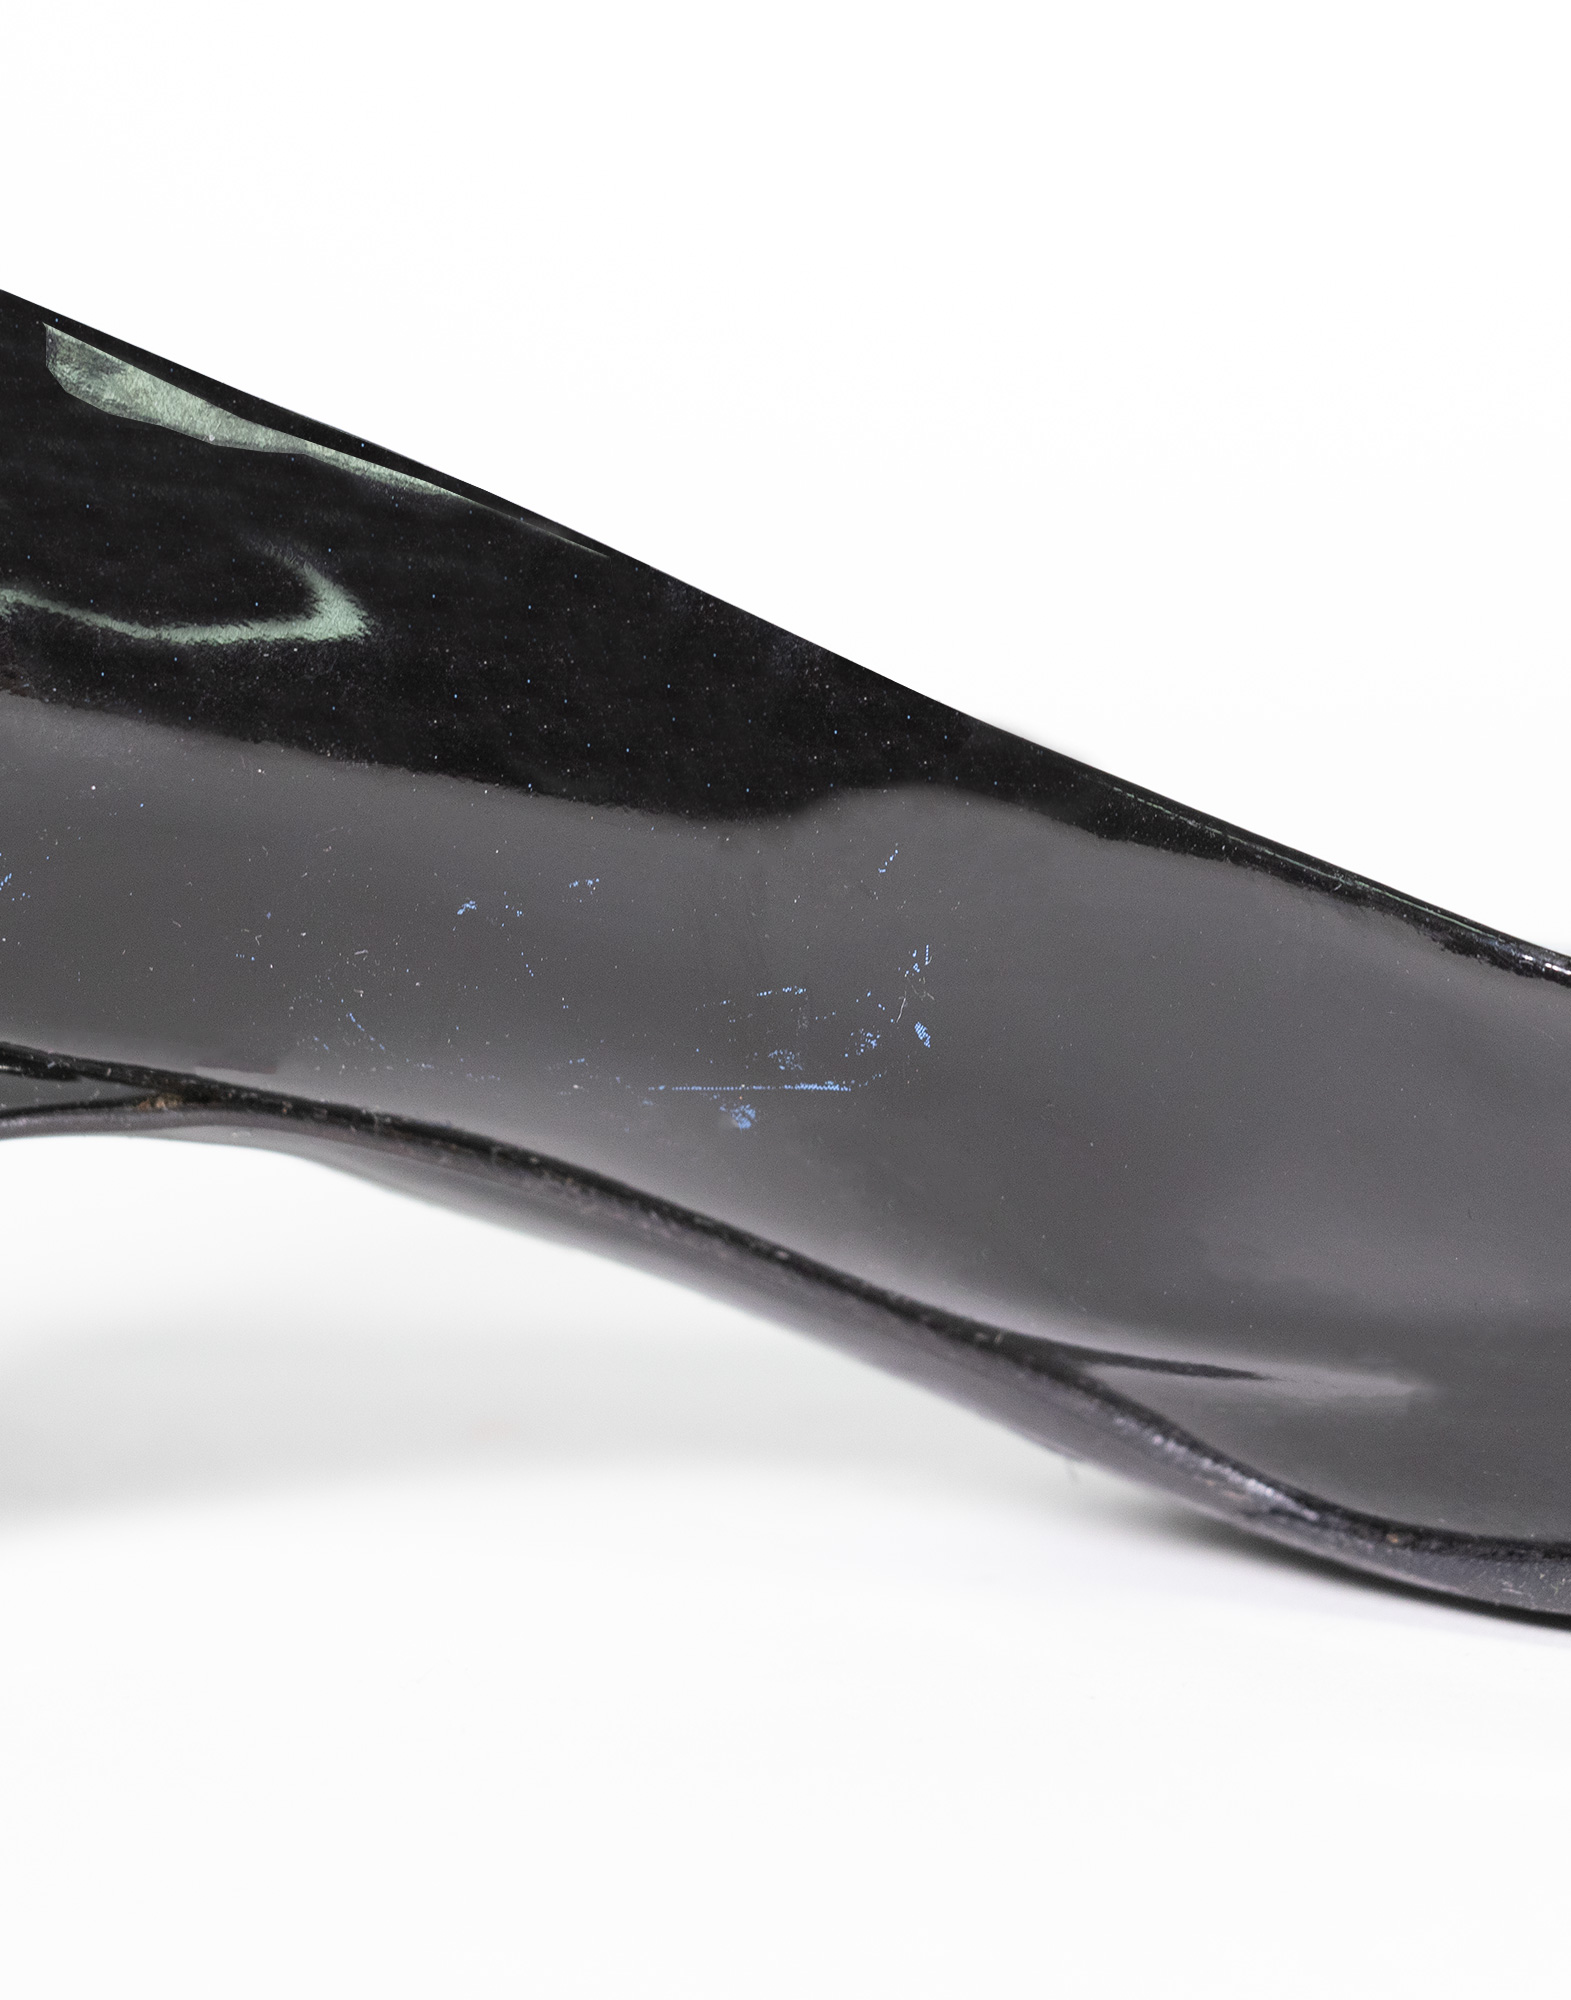 Christian Dior - Vintage pumps in black patent leather